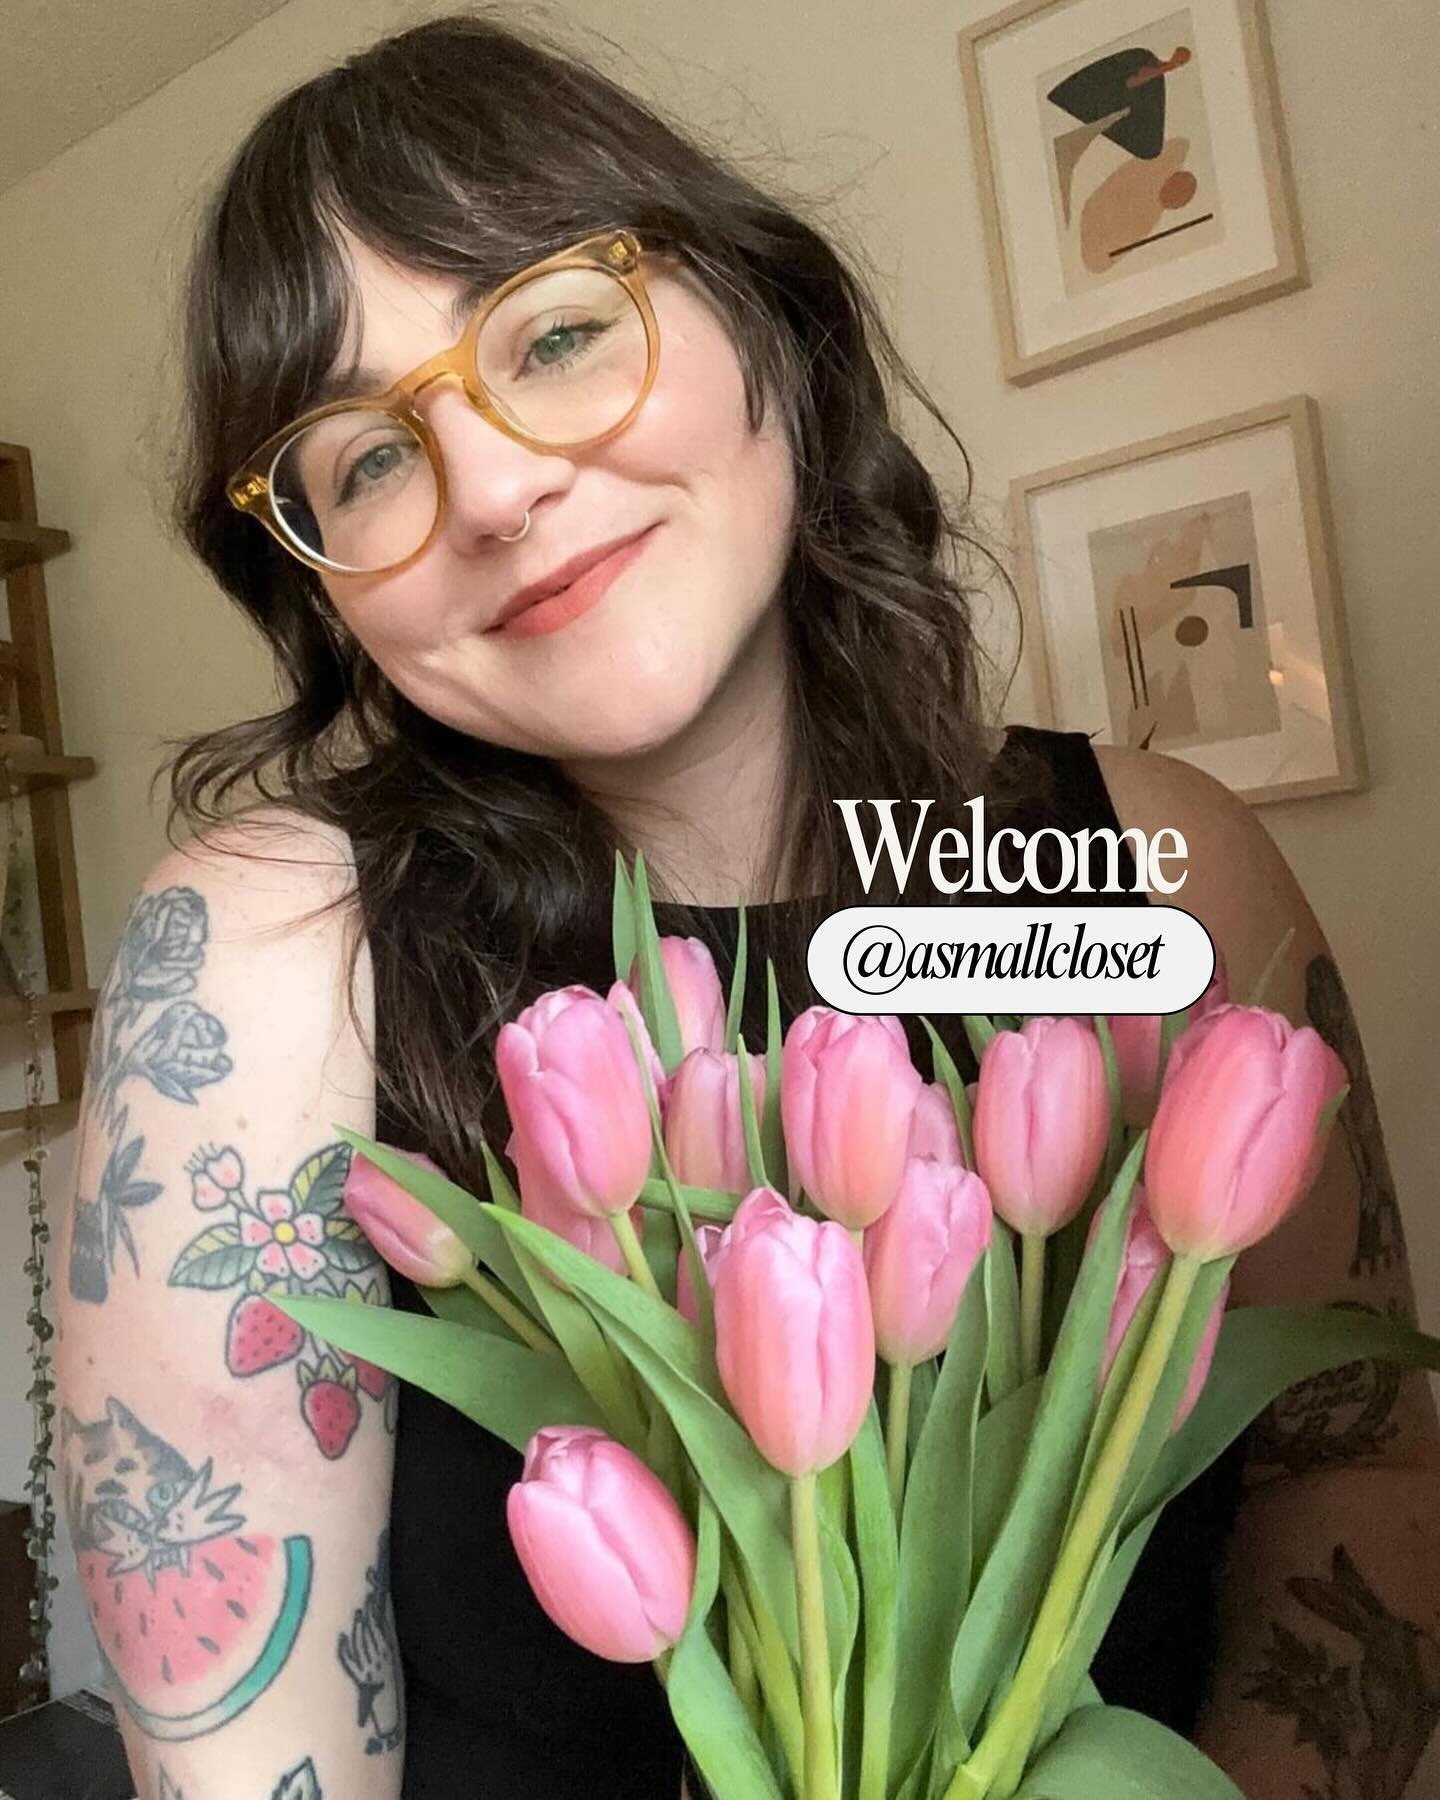 Meet @asmallcloset 🌷

Lyndsey is a Portland-based lifestyle creator who prioritizes the environment while sharing personal style and home design. She also shares about day-to-day life things like parenting, budgeting, her love of sewing clothes and 